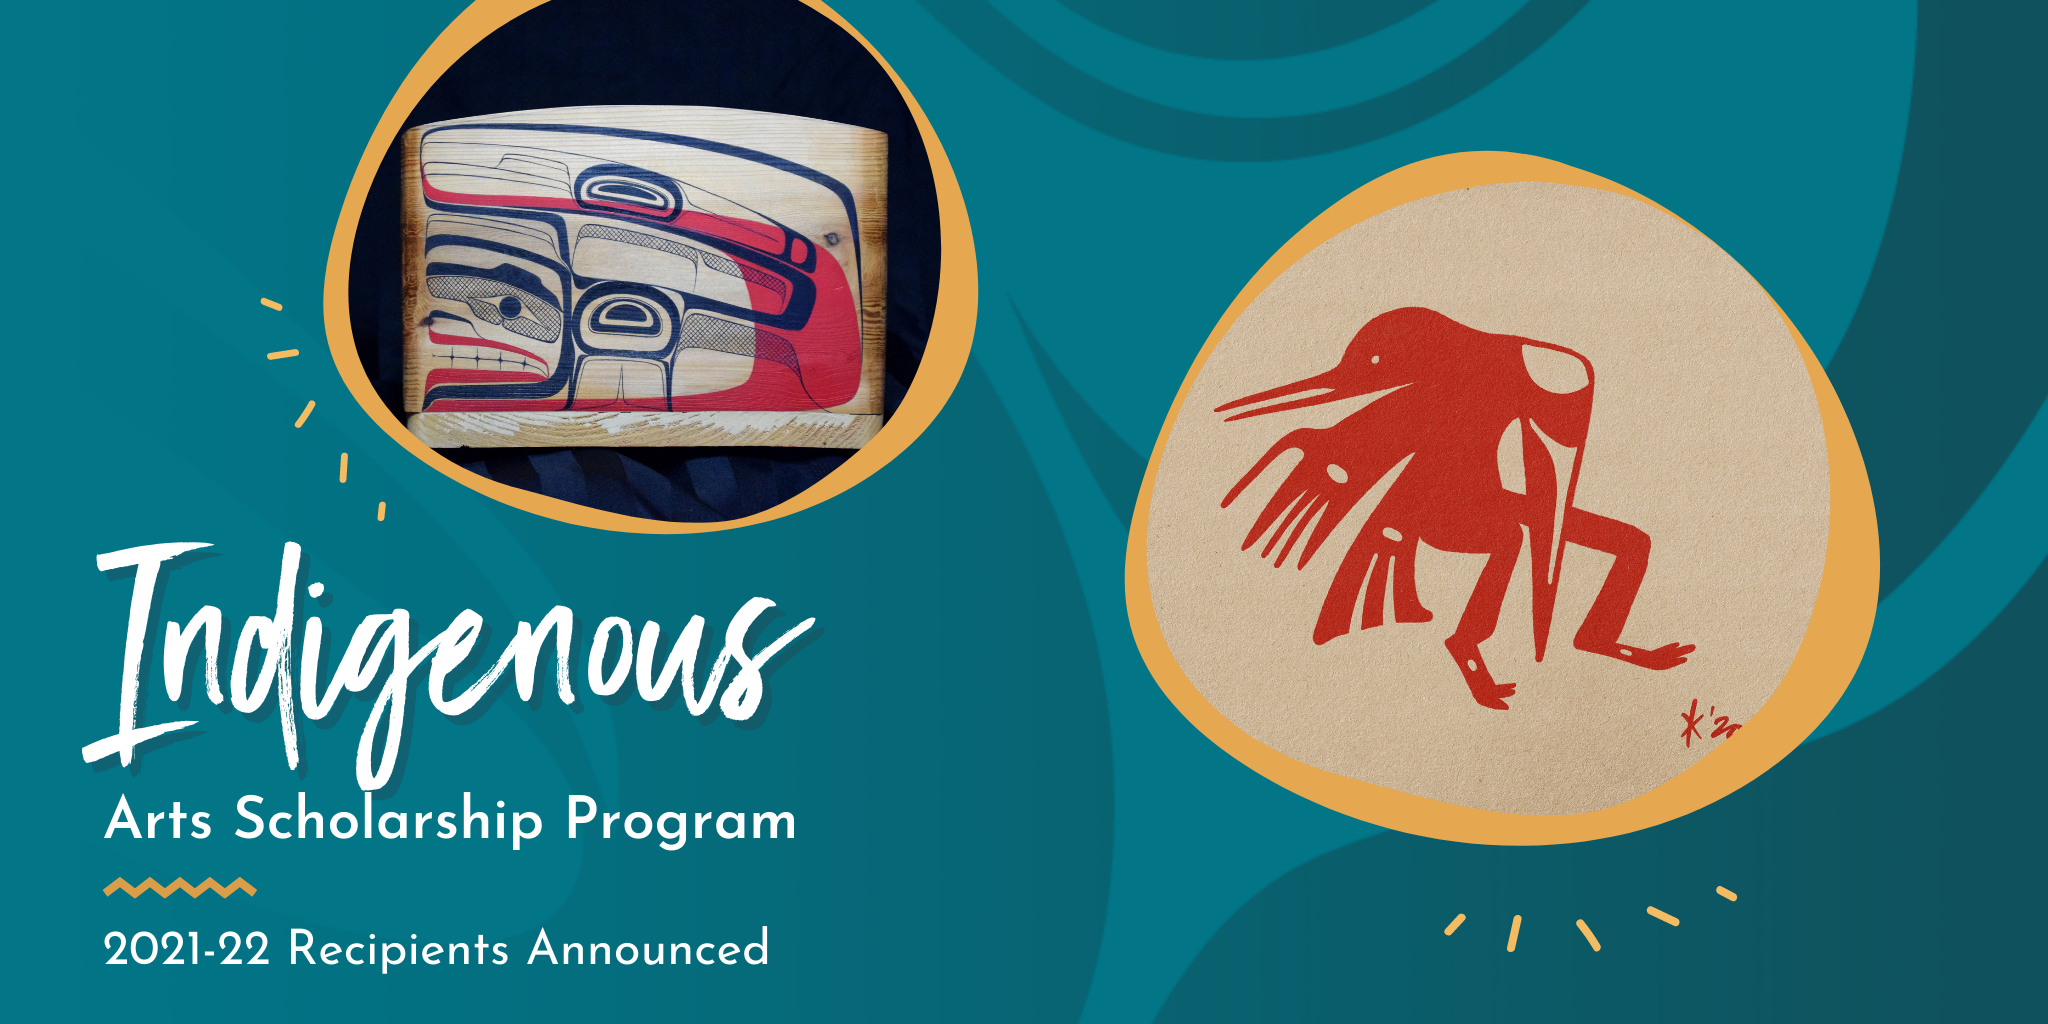 FPCC graphic, detailing Indigenous Arts Scholarship information and key dates